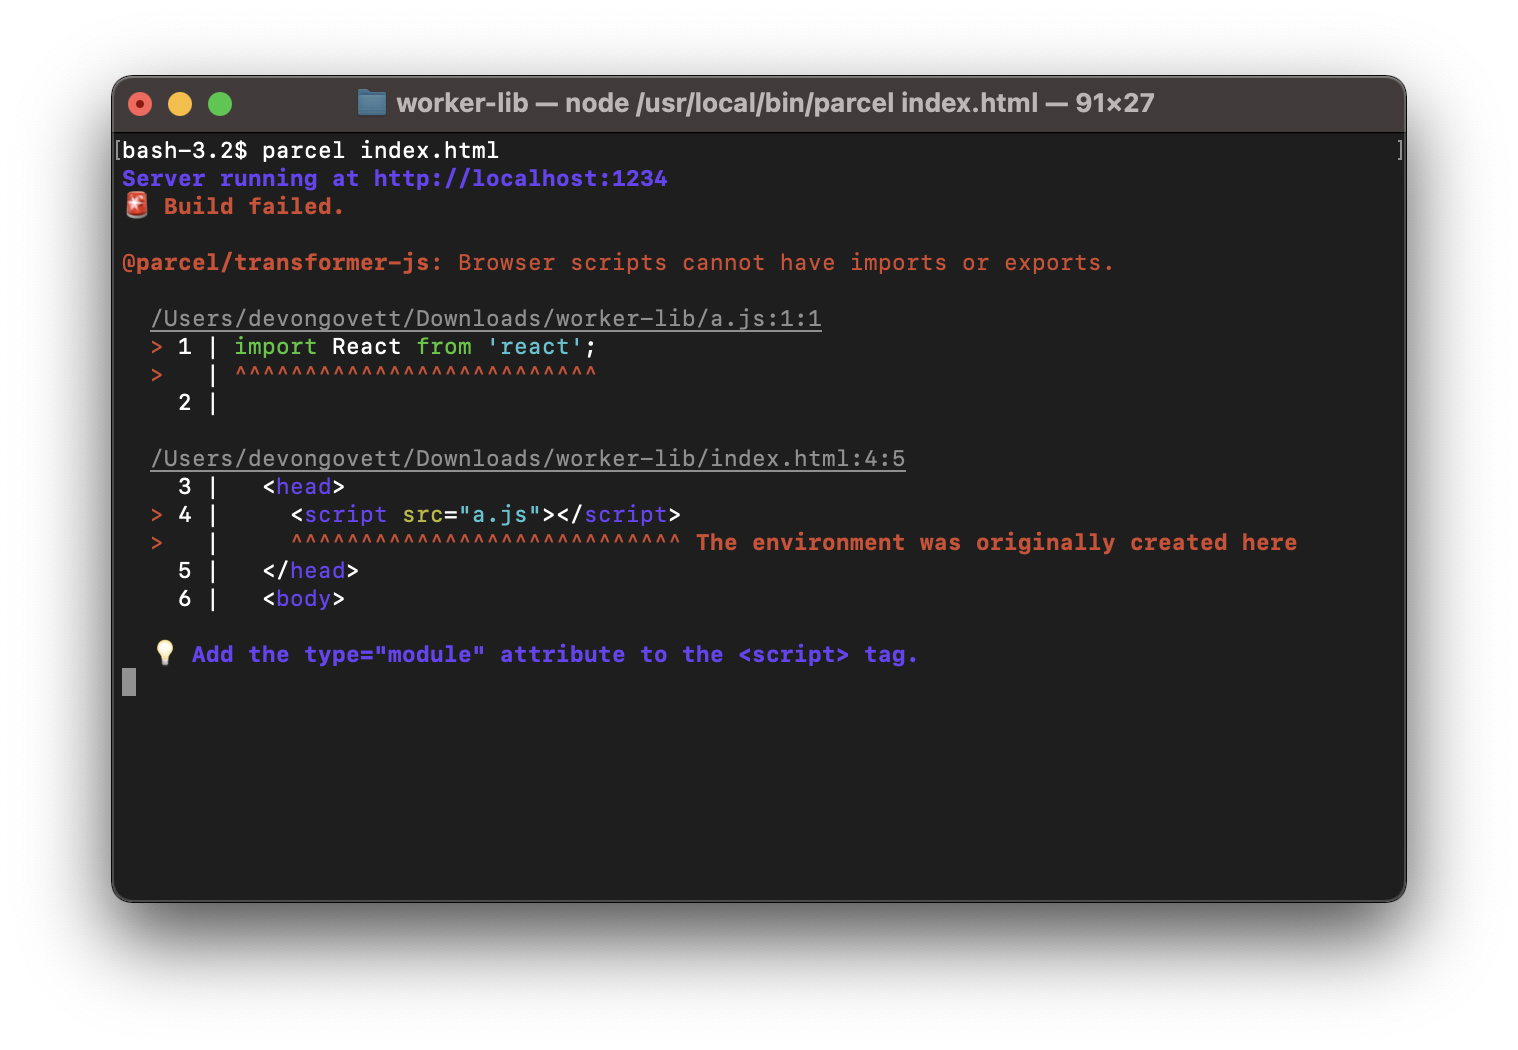 Screenshot of an error message showing "Browser scripts cannot have imports or exports. Add the type='module' attribute to the script tag."